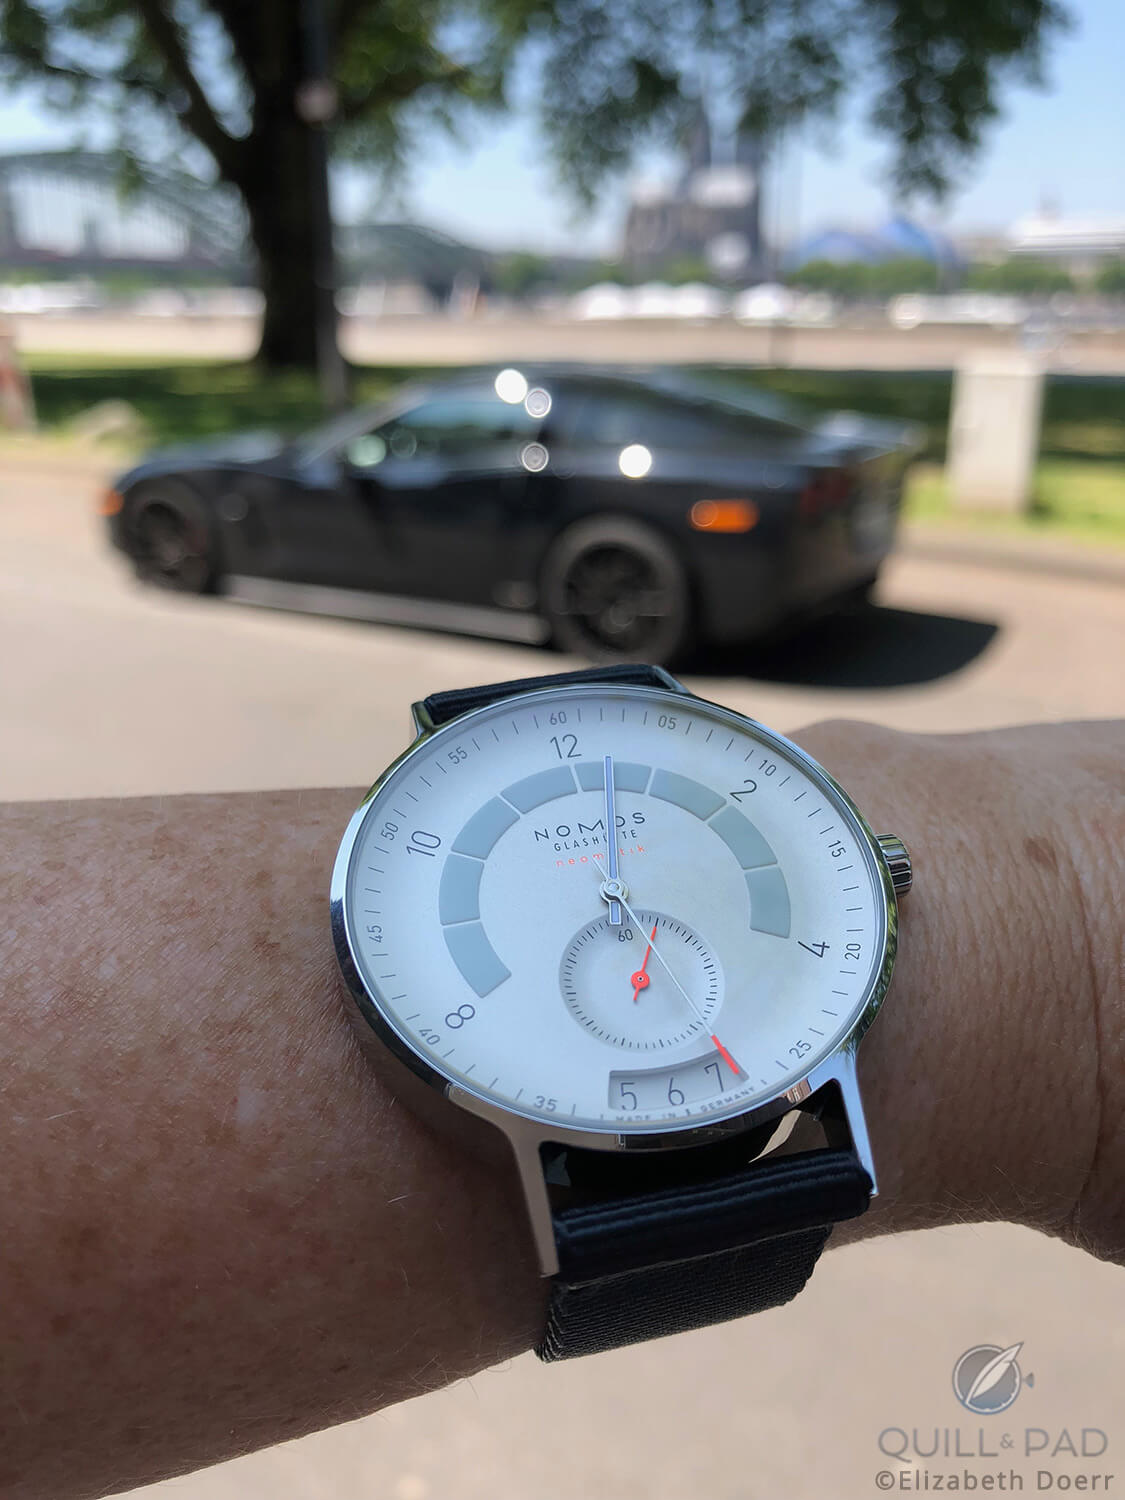 Across the river from the Cologne Cathedral with the Nomos Glashütte Autobahn and my Corvette